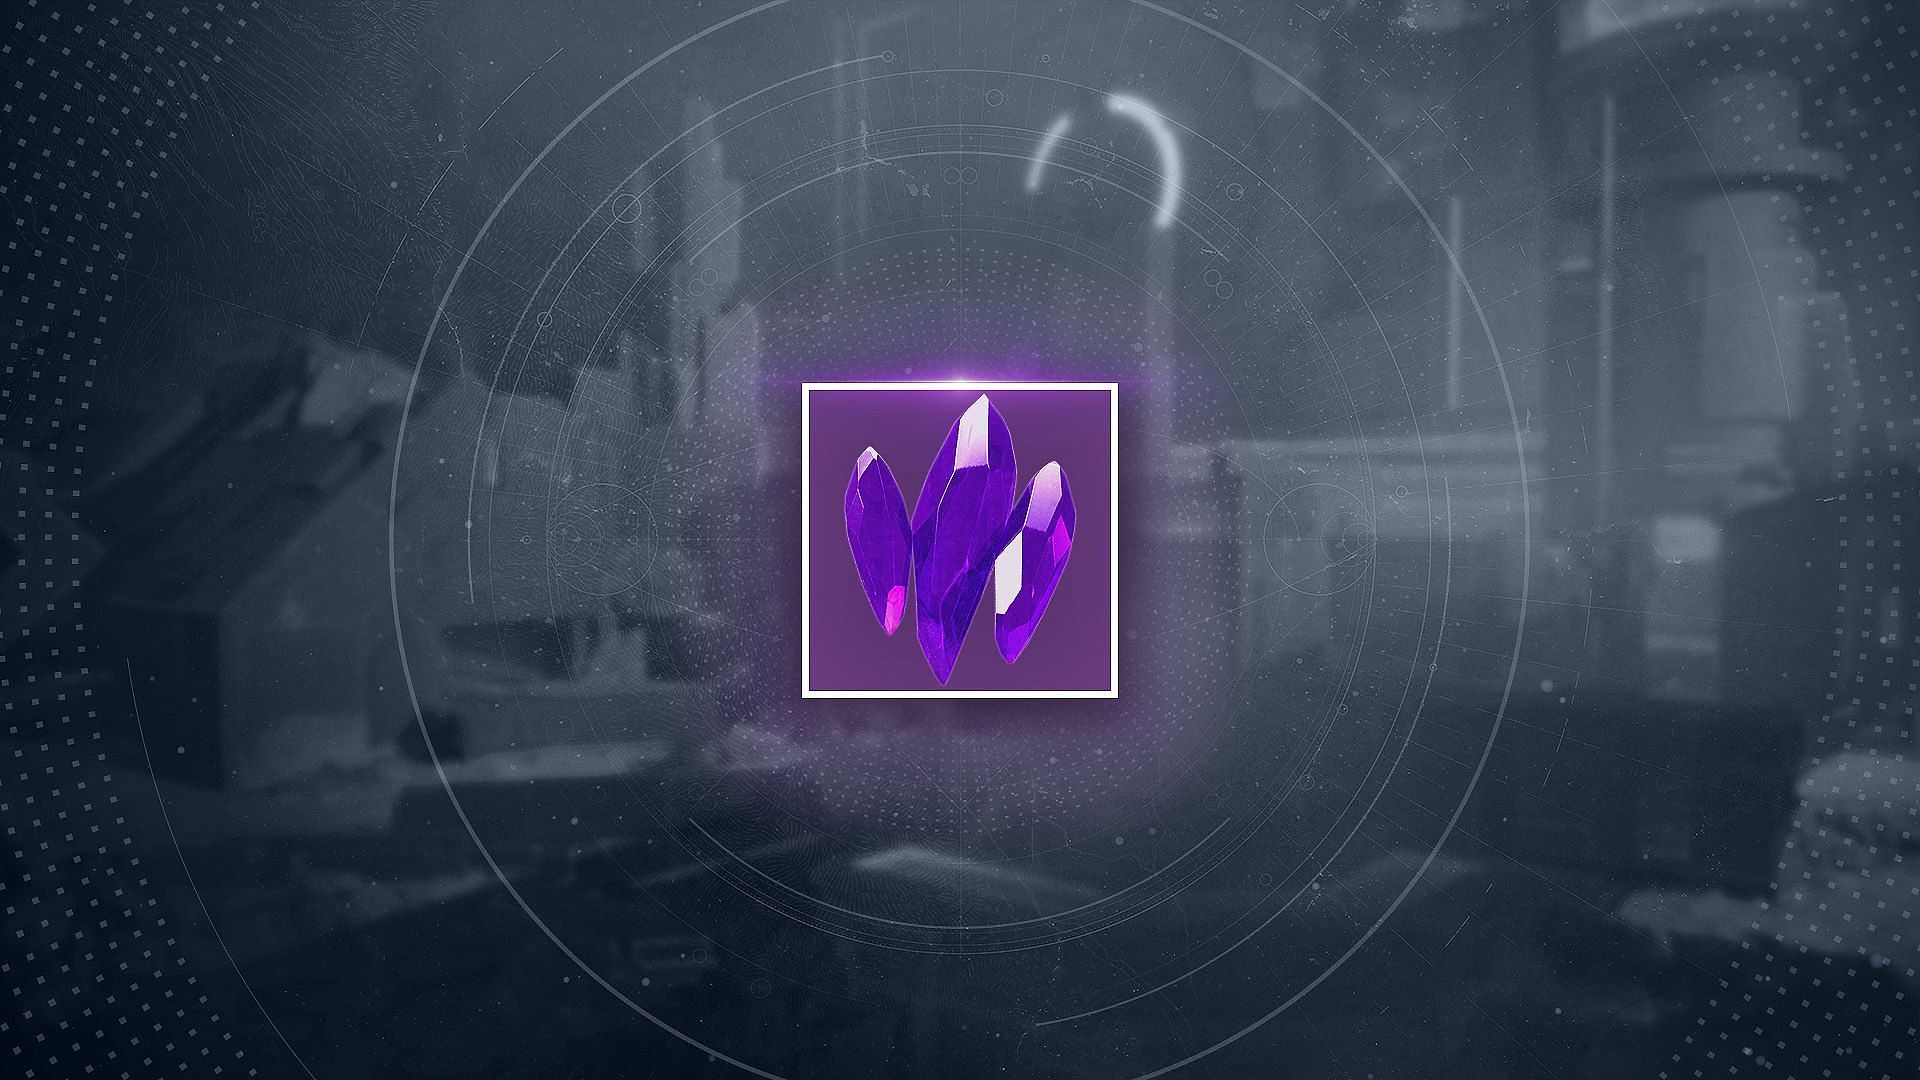 Legendary Shards picture used in the official TWID of September 14